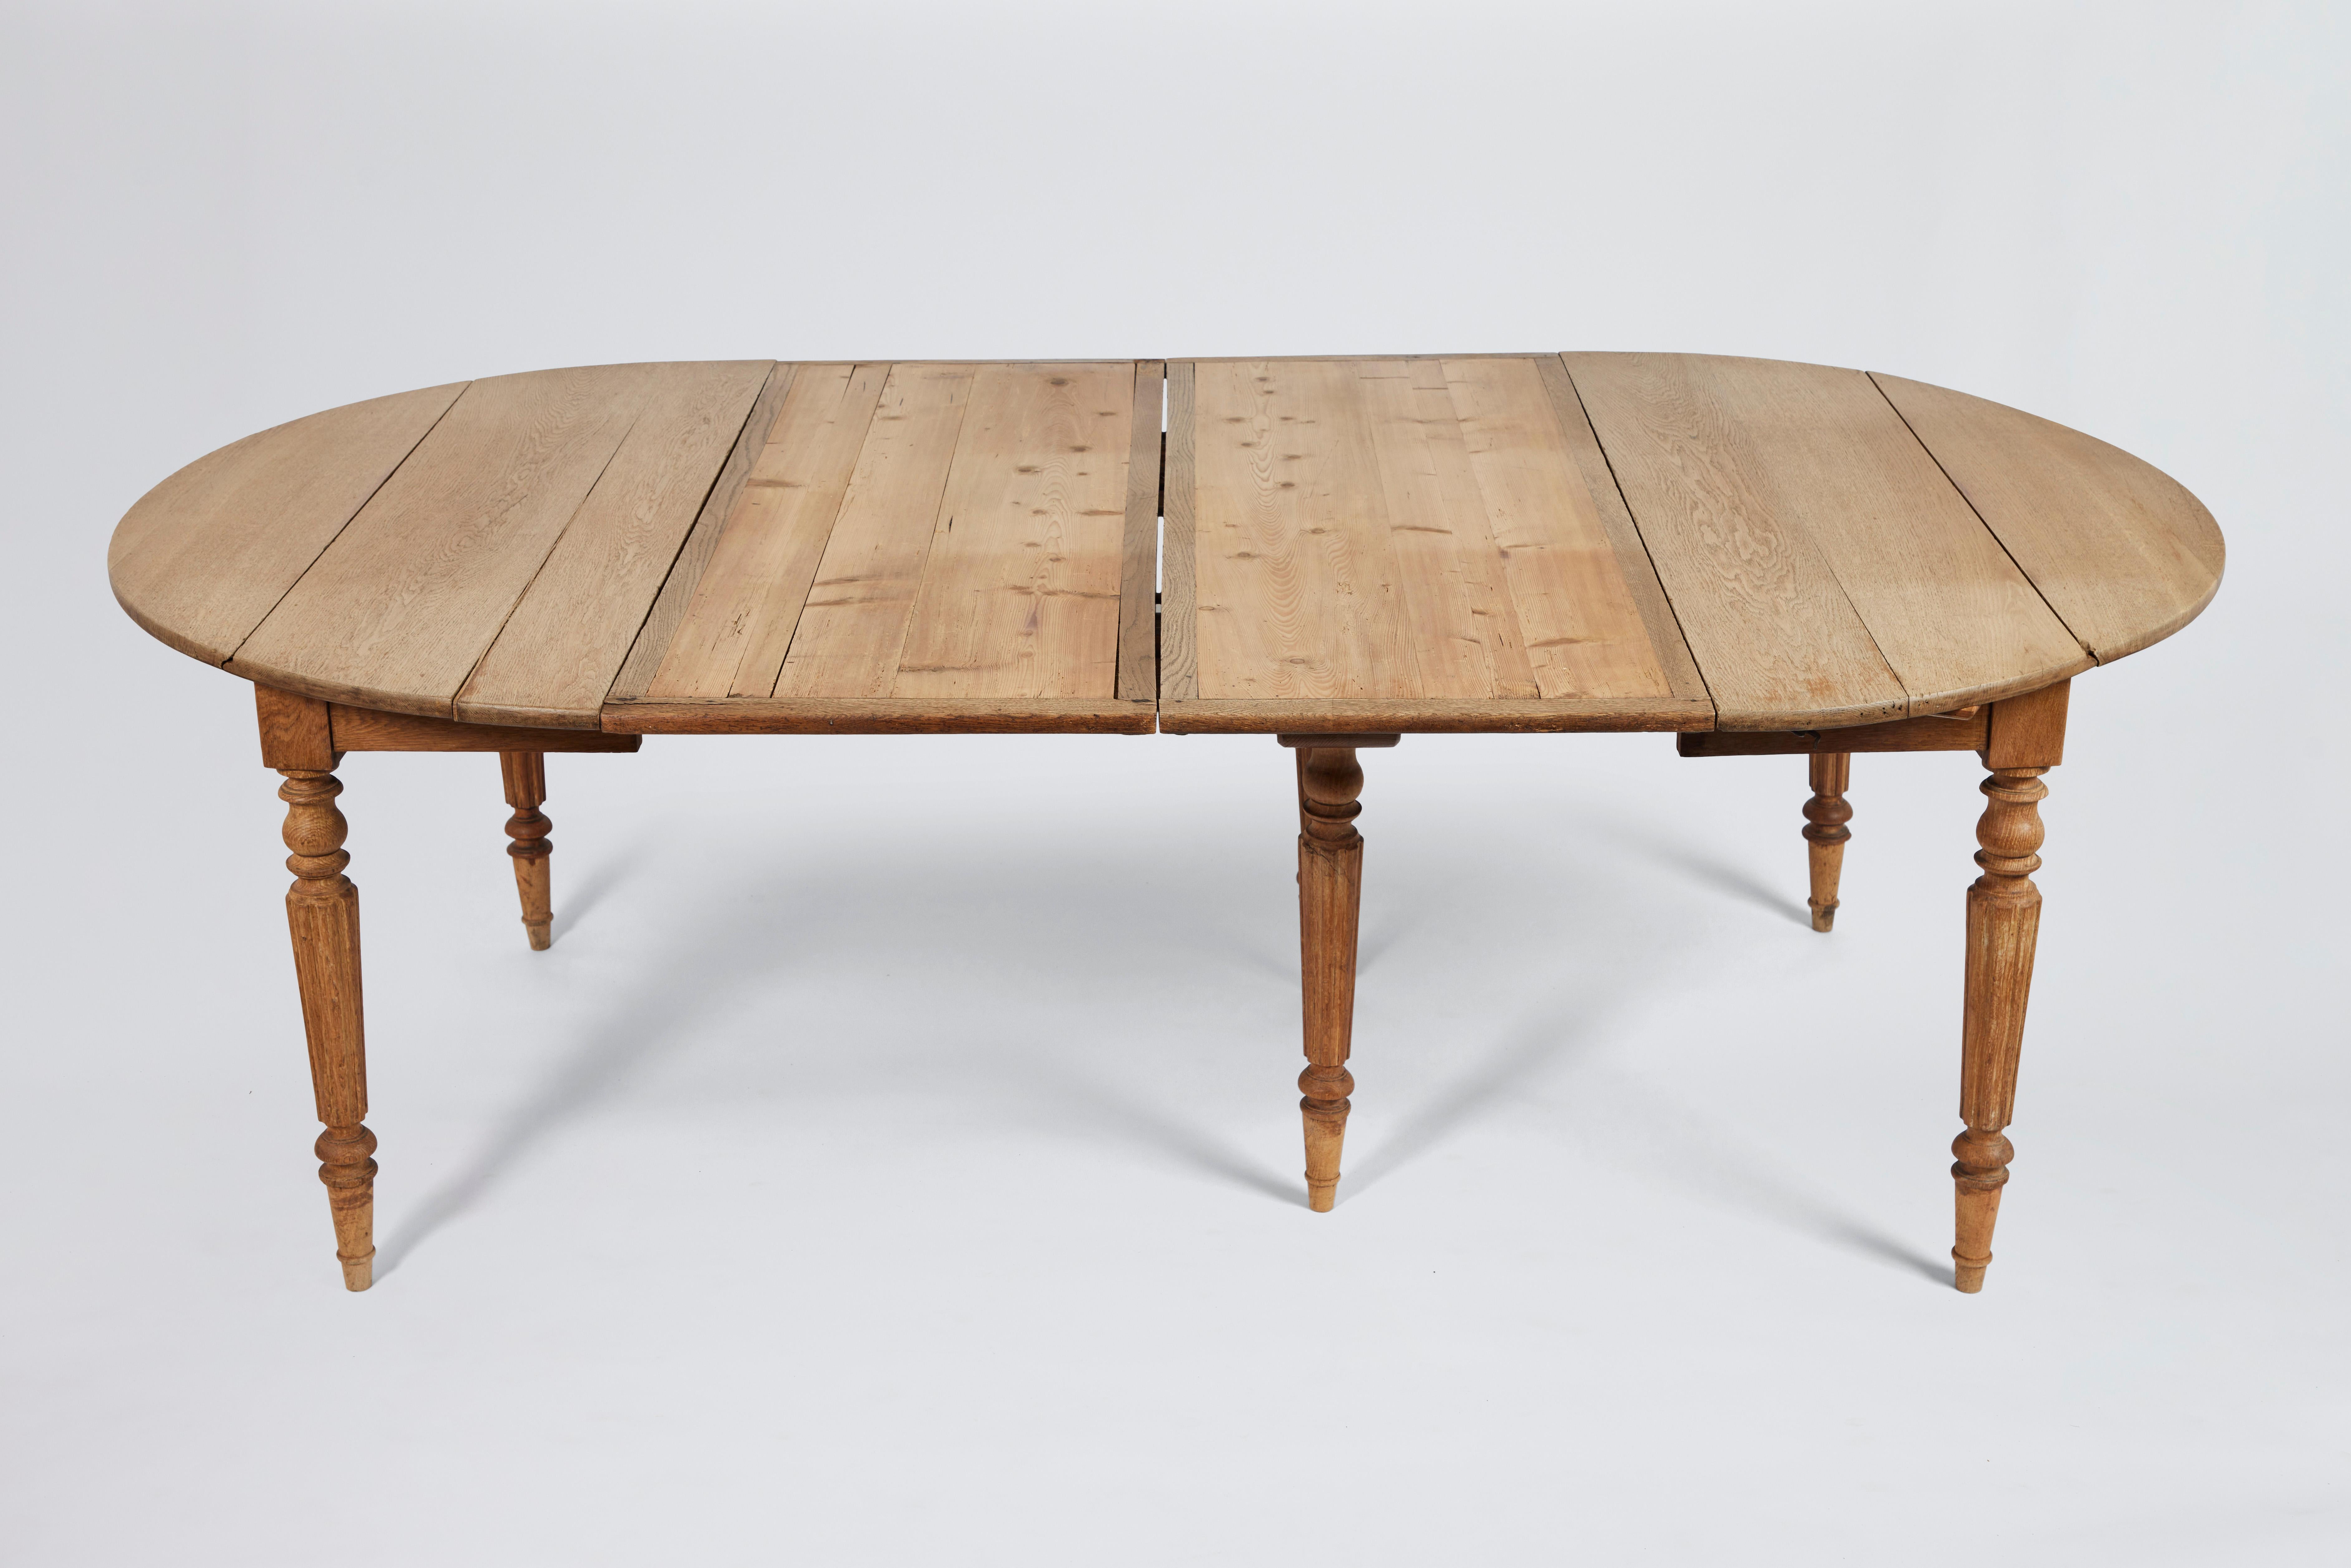 19th Century 19th C. English Oak Expandable Dining Table with Four Leaves